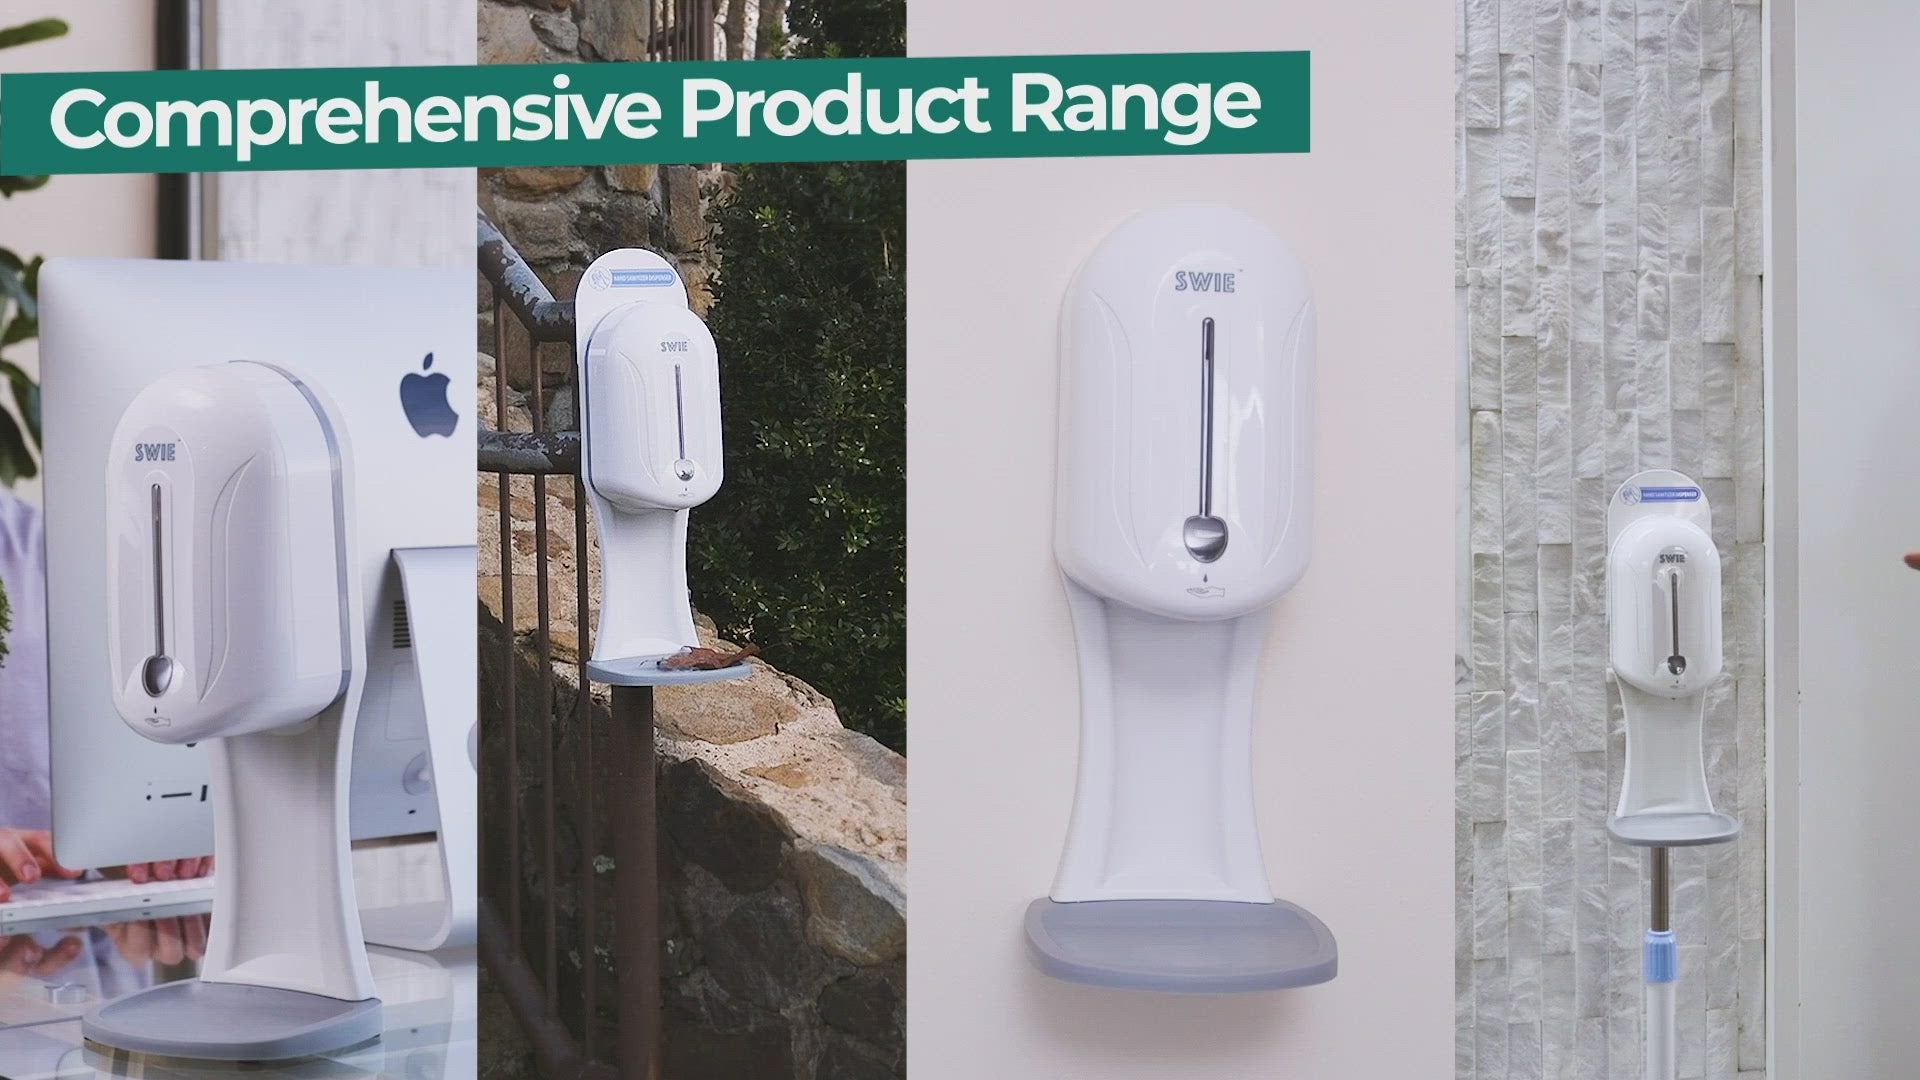 All-Weather Automatic Hand Sanitizer & Soap Dispenser. Rain, Snow & Waterproof, Outdoor/Indoor, Wall Mounted